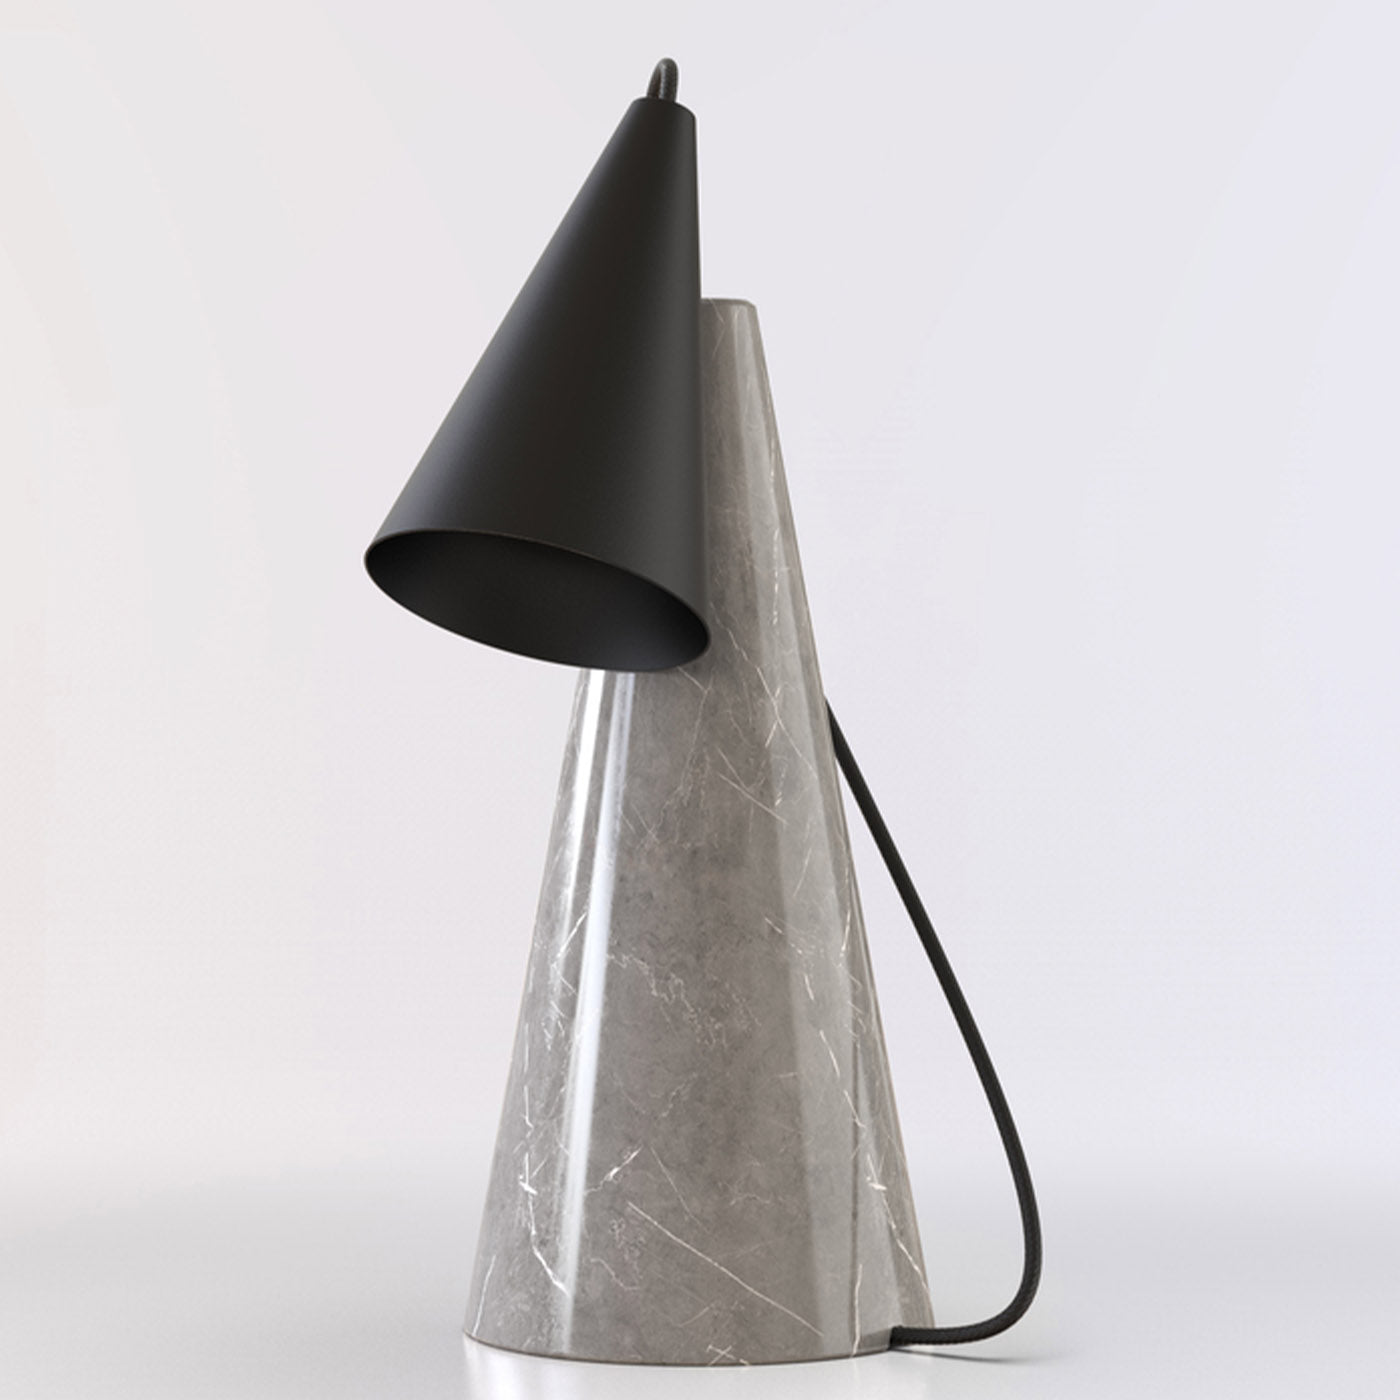 ED038 Grey Stone and Black Table Lamp - Alternative view 1